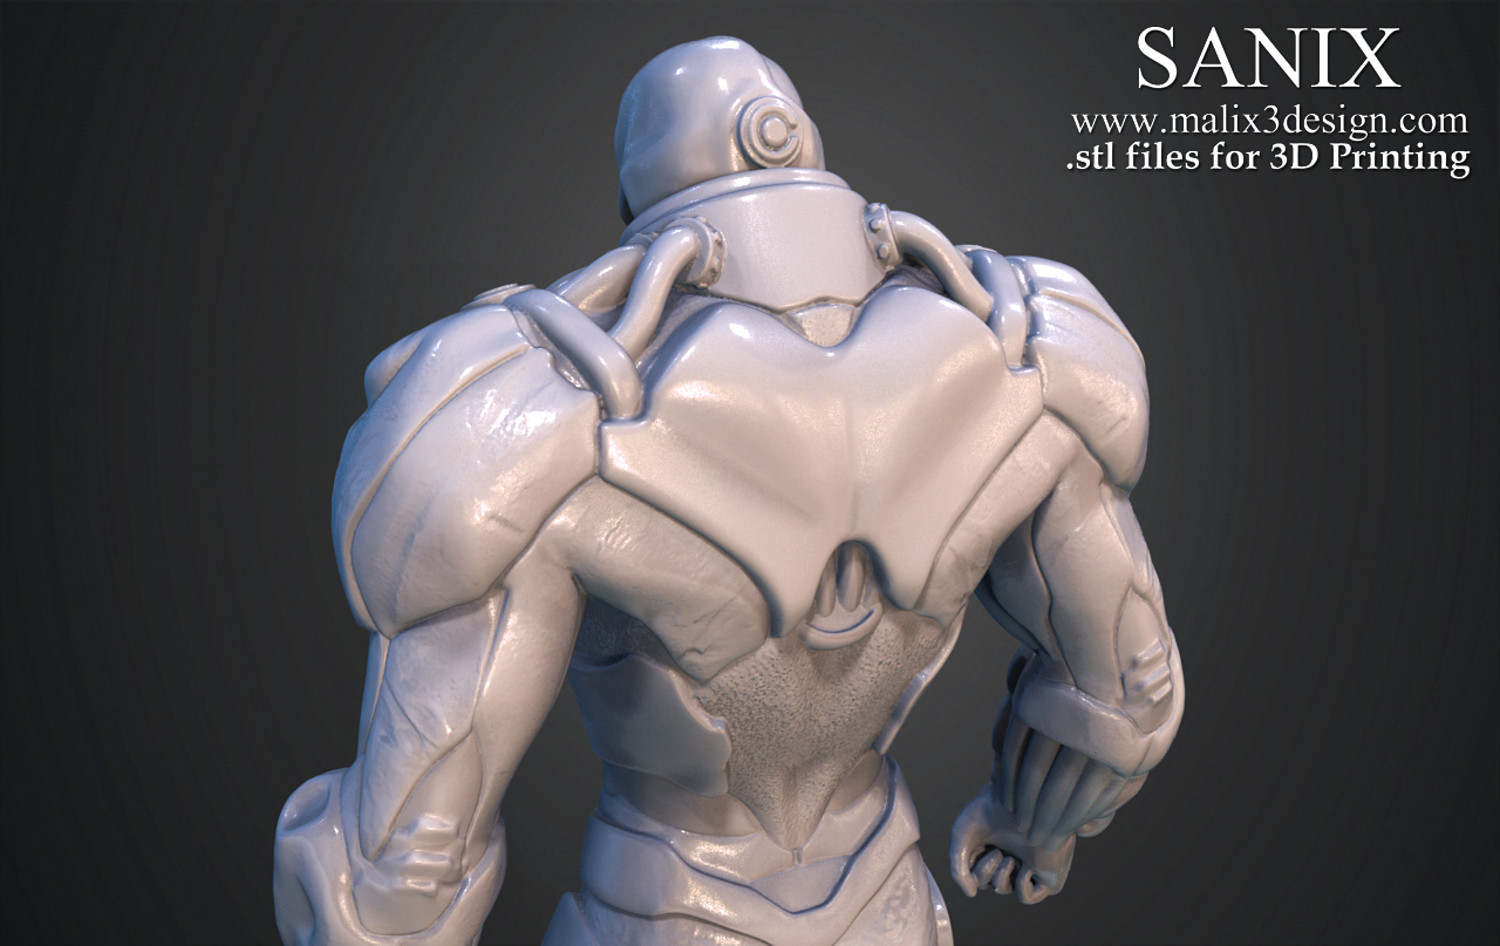 Justice League - 6 characters for 3D Printing